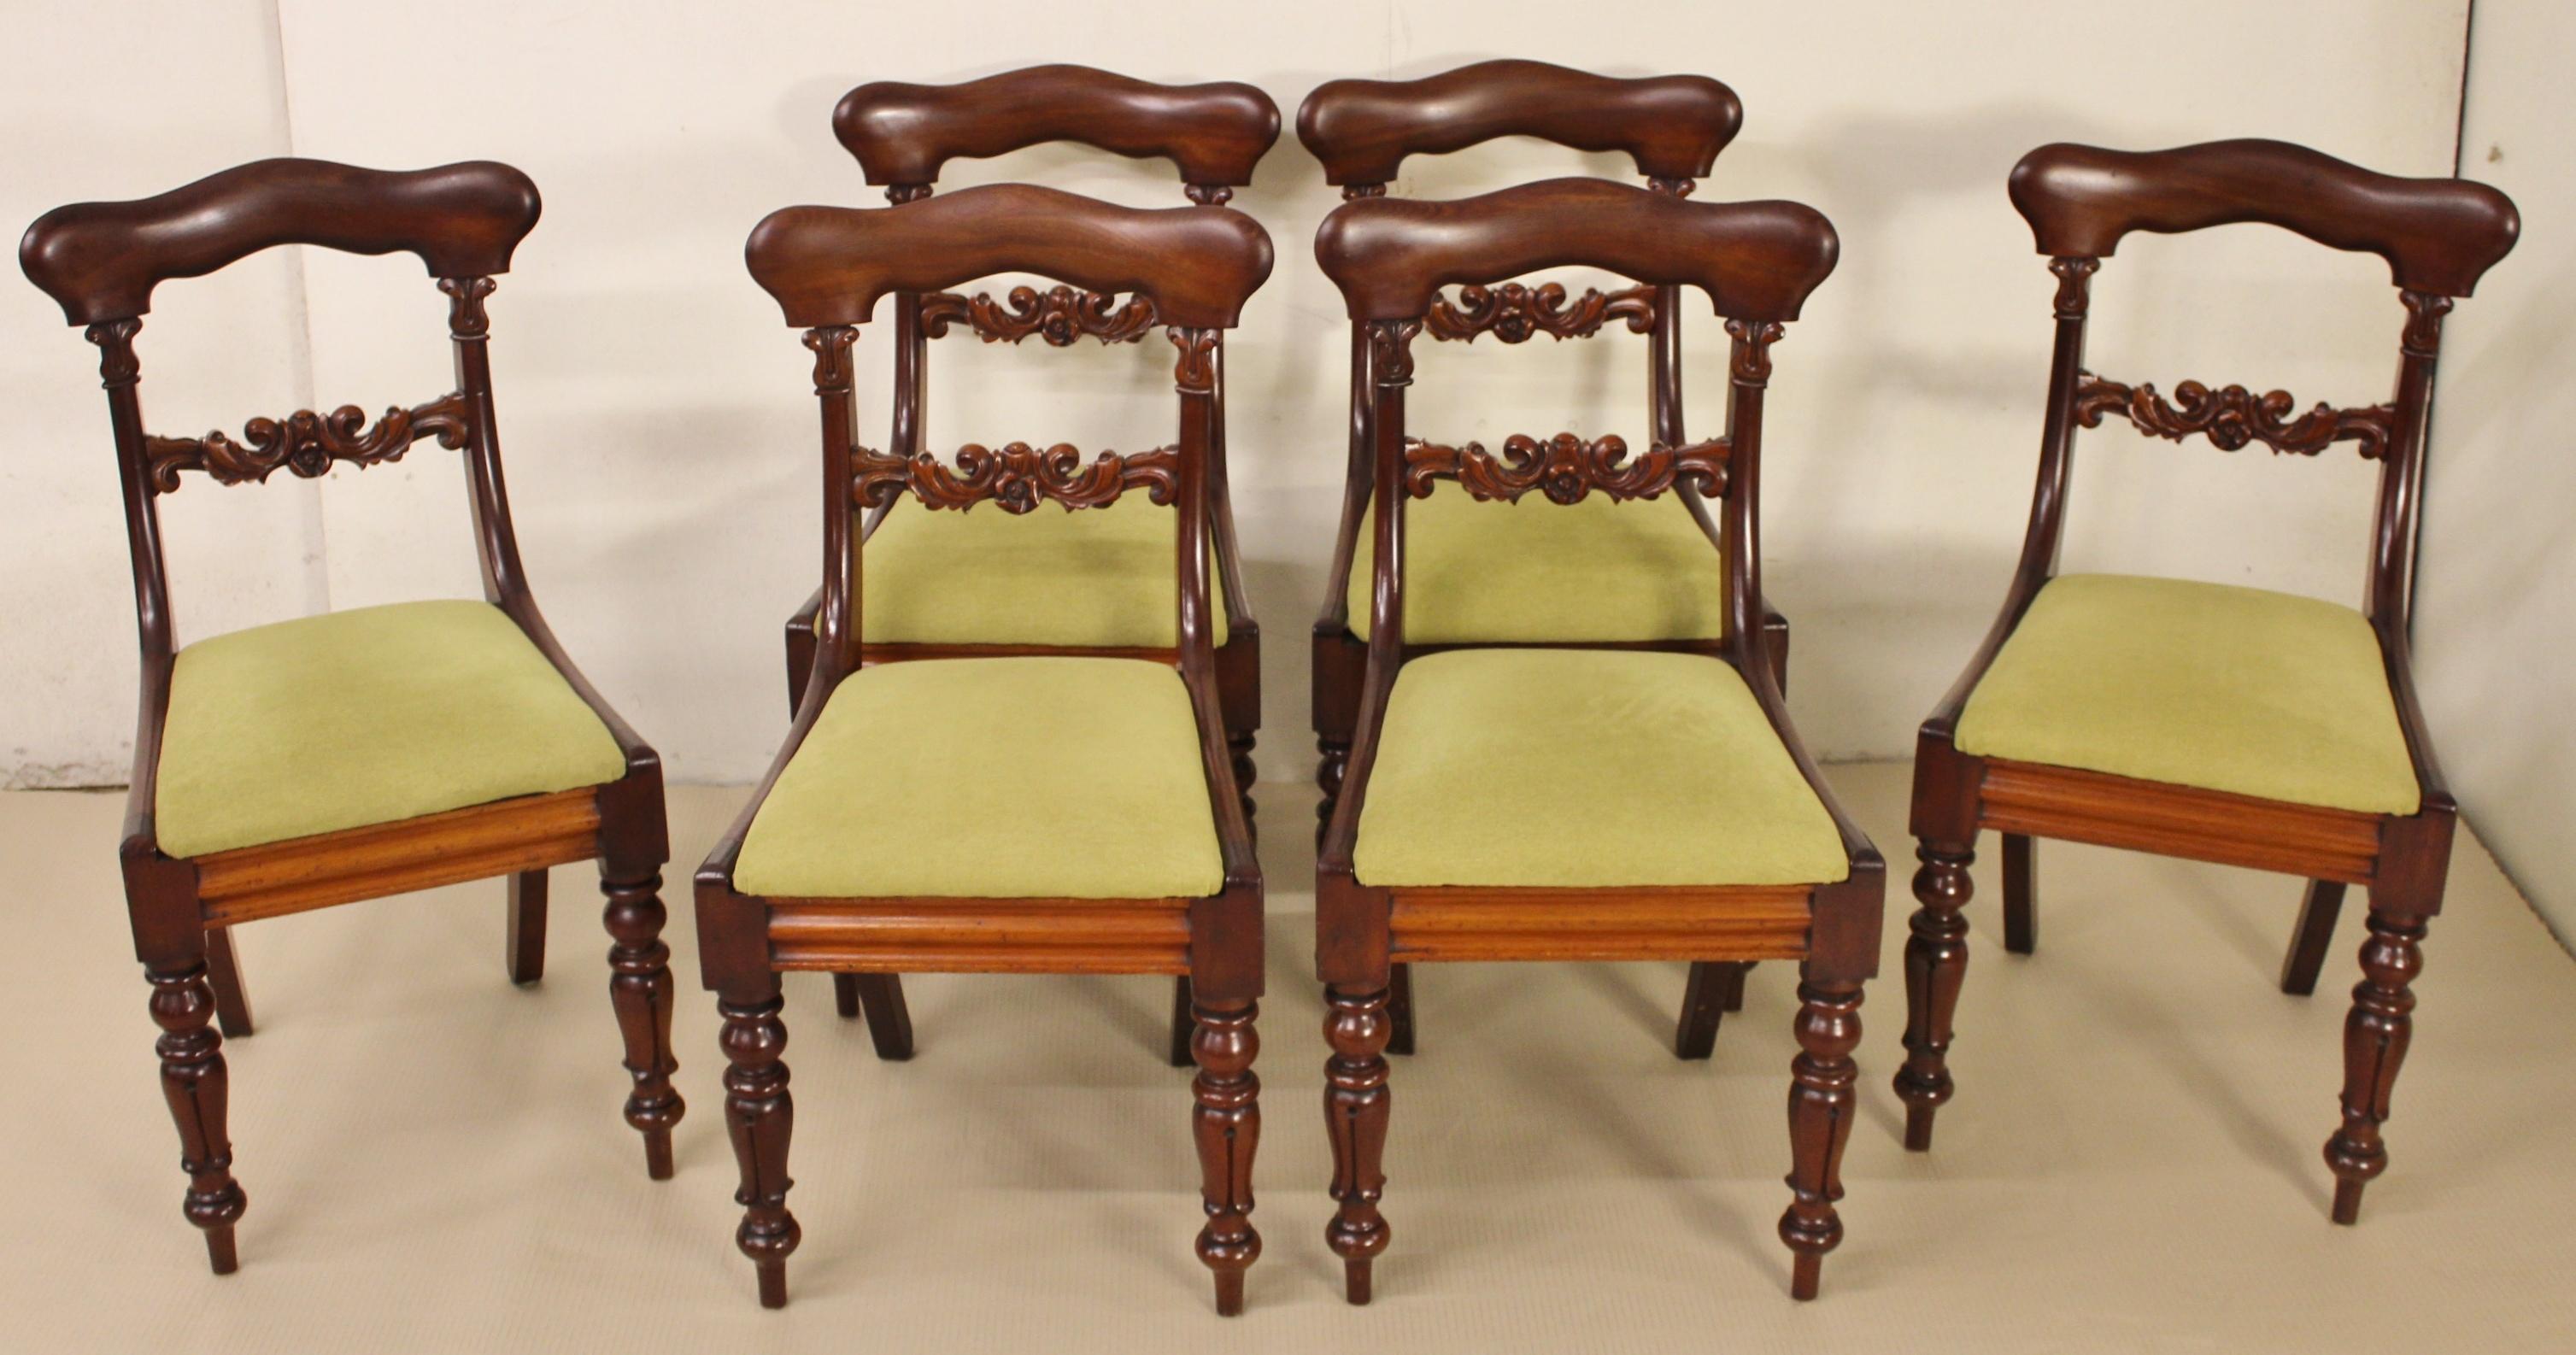 An excellent set of 6 early Victorian dining chairs. Of very good construction in solid mahogany, now with a great depth of colour and patina. With nice carved detailing to the back splats and standing on elegant turned, stylised 